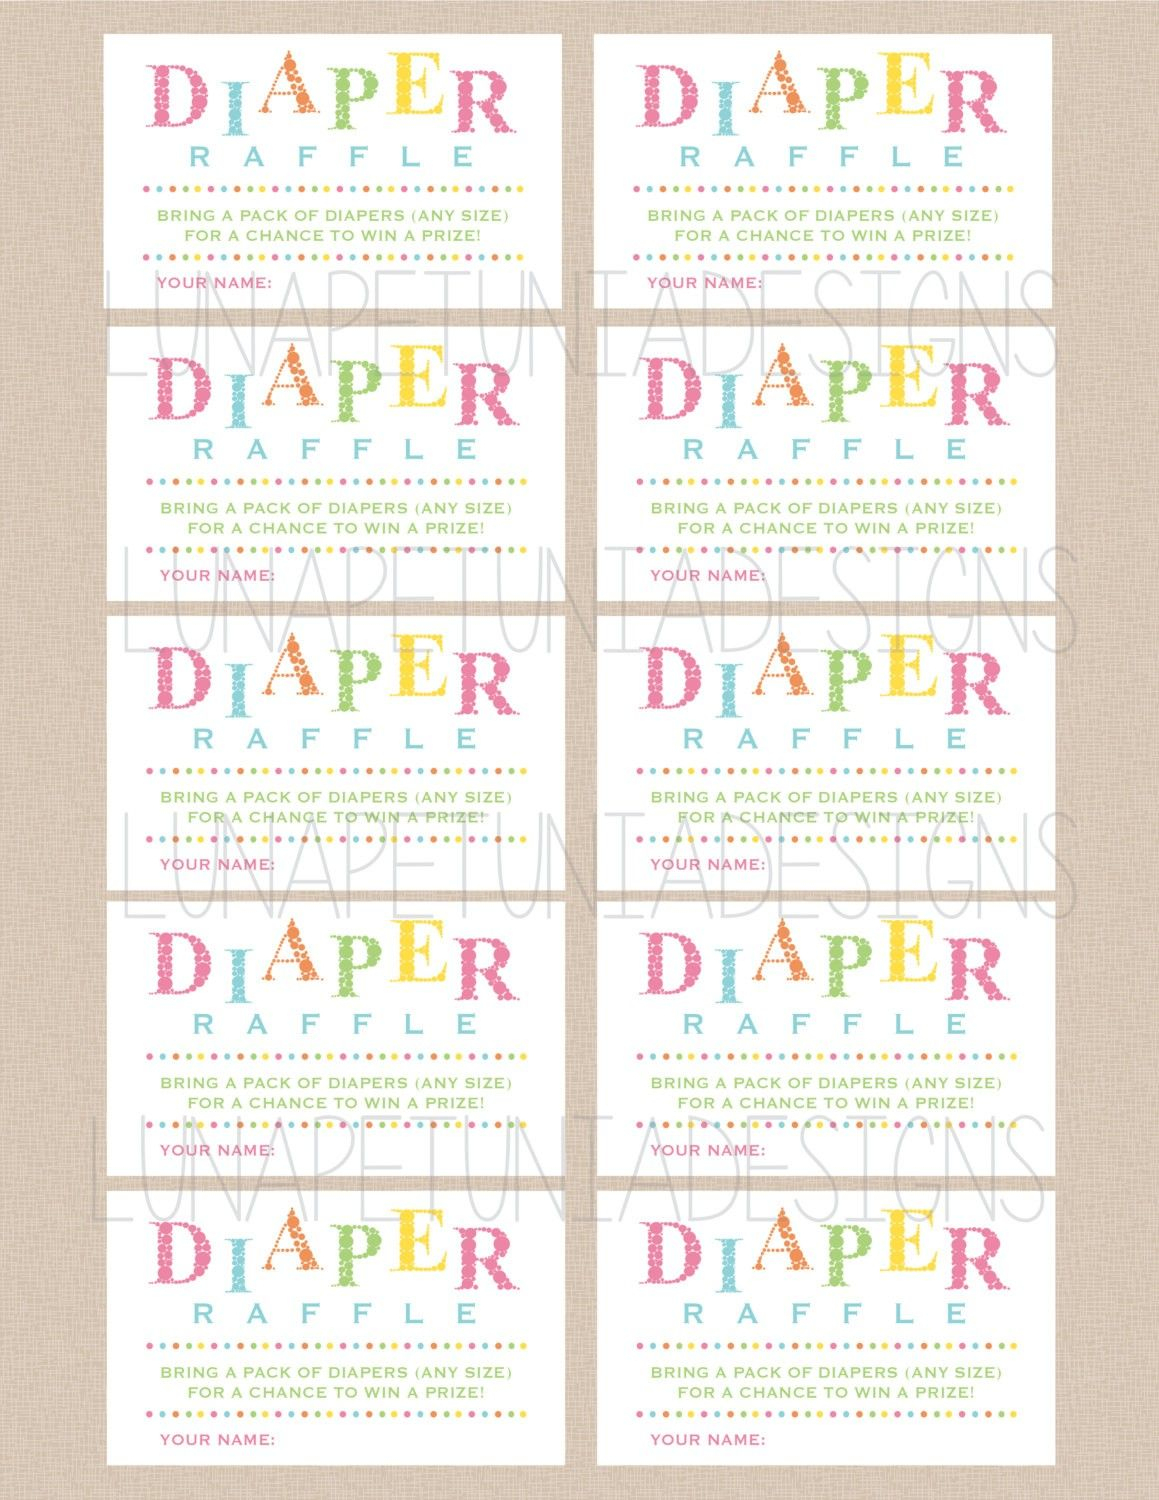 Charming Decoration Printable Diaper Raffle Tickets For Baby Boy - Free Printable Diaper Raffle Tickets For Boy Baby Shower